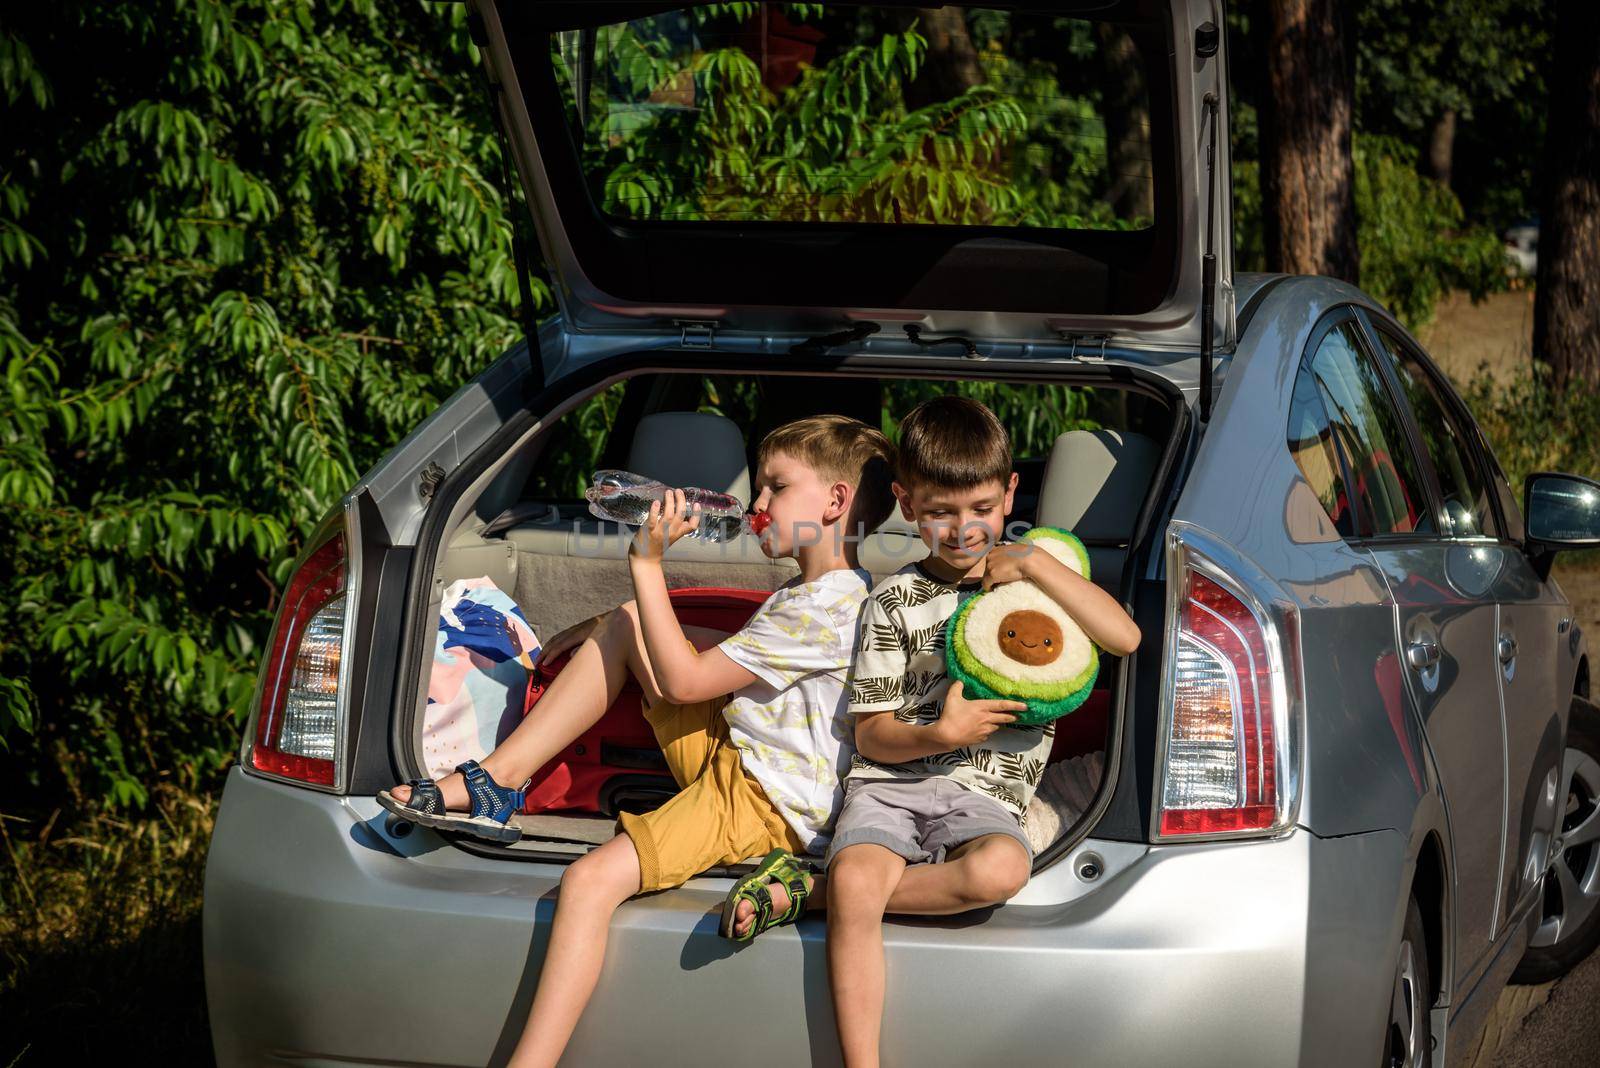 Two happy children boy and his brother sitting together in a car trunk. Cheerful kids hugging each other in family vehicle luggage compartment. Weekend travel and holidays concept by Kobysh